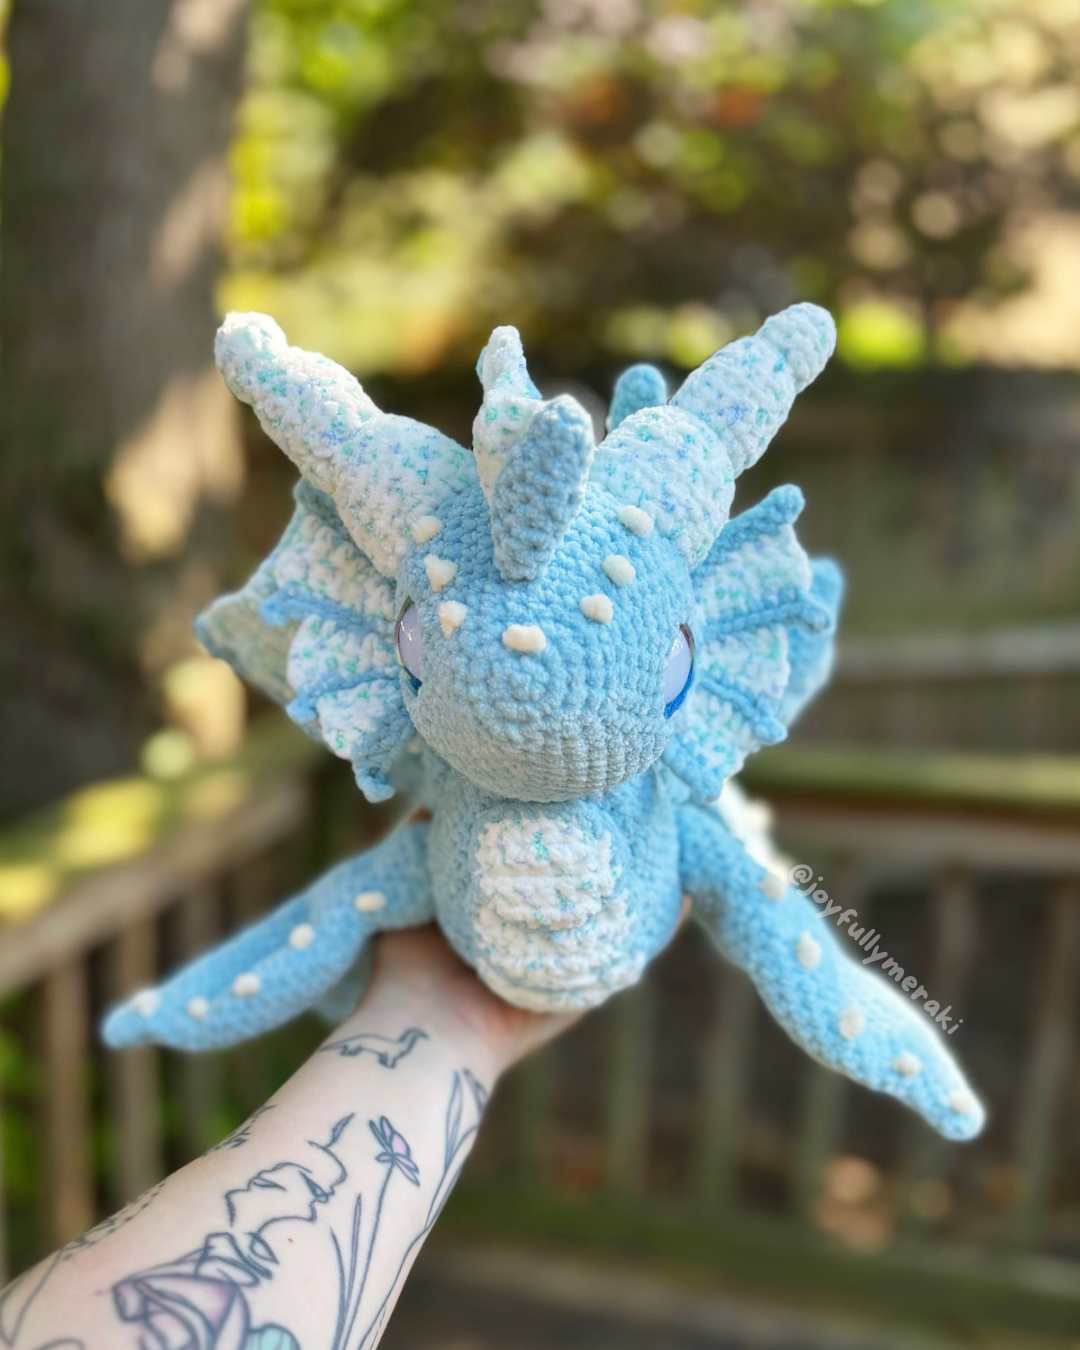 Giant Water Dragon Crocheted Plushie